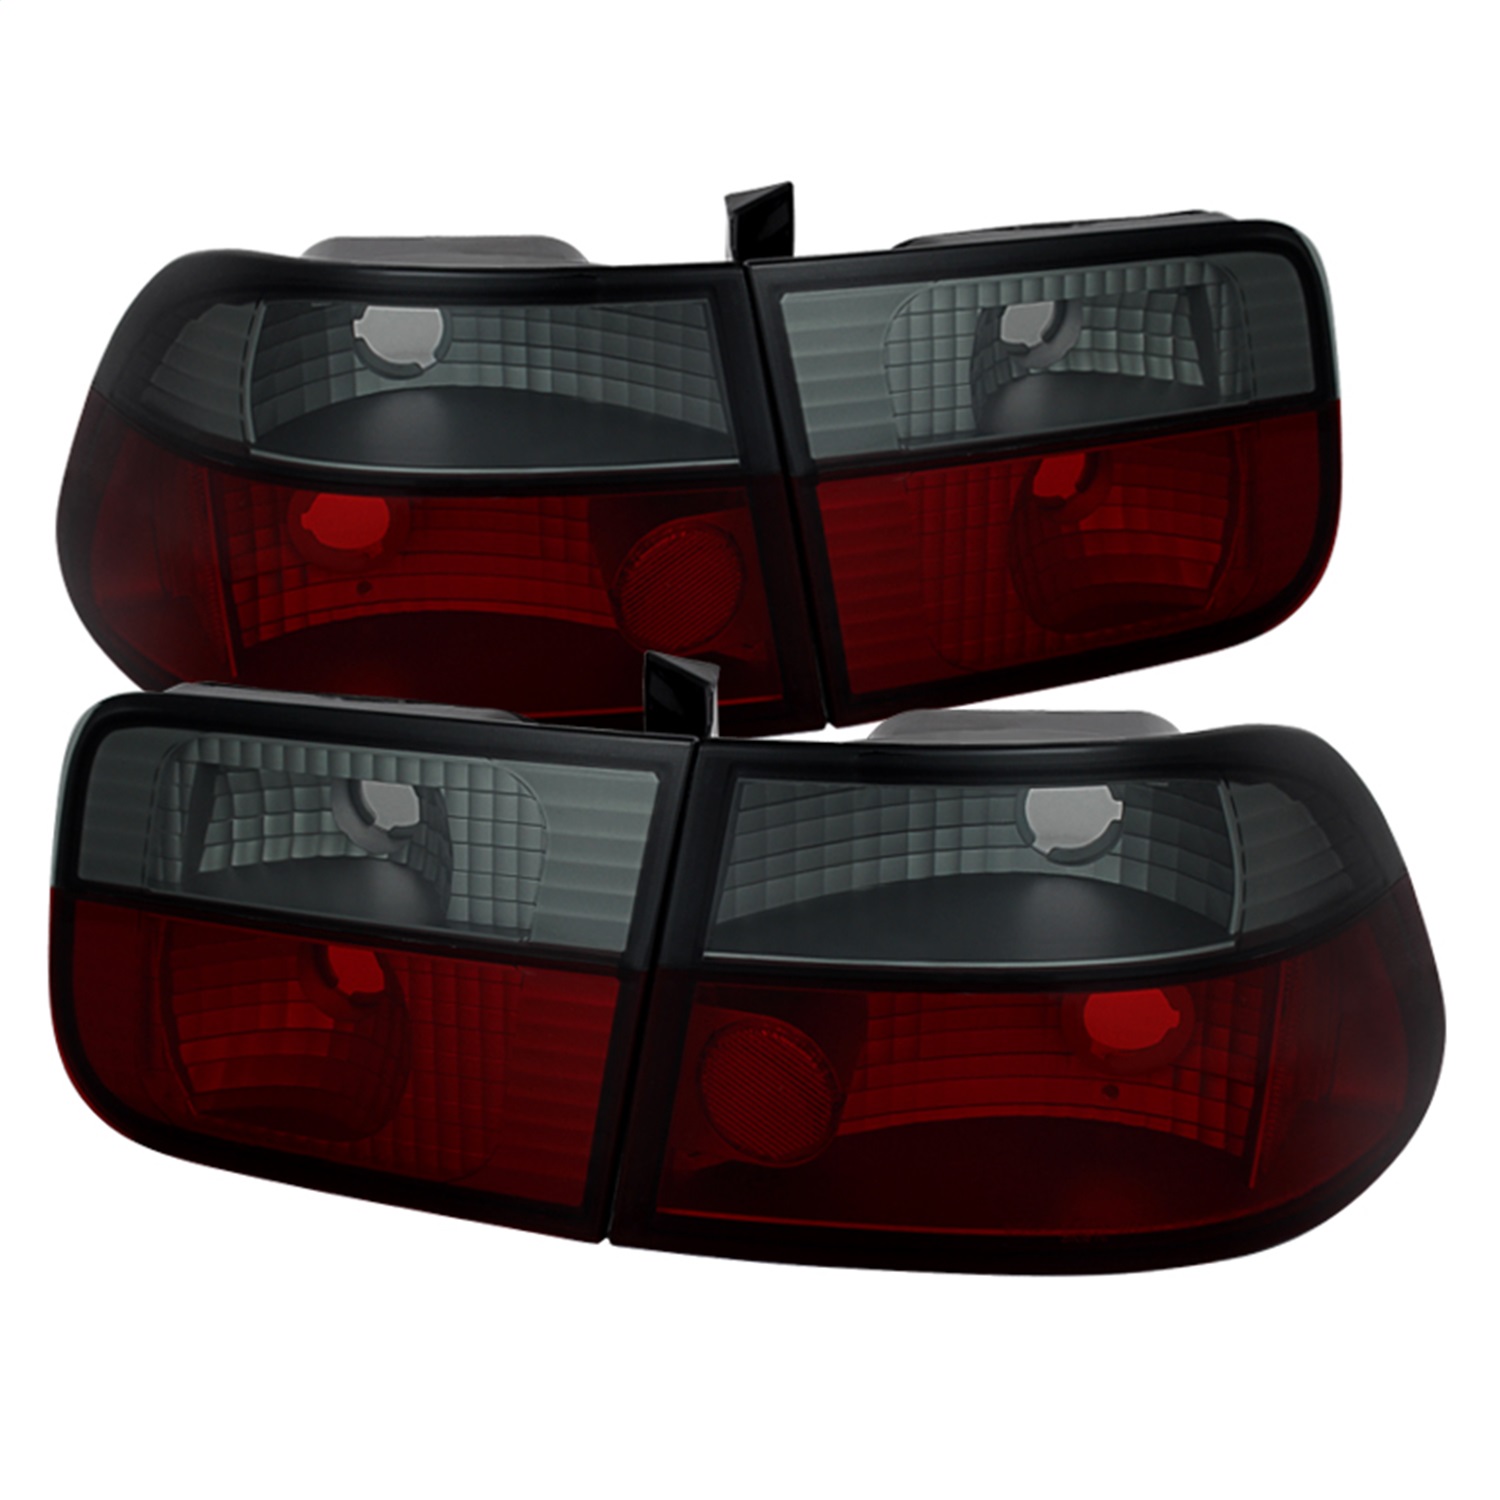 Spyder Auto 5076557 Crystal Tail Lights Fits 96-00 Civic